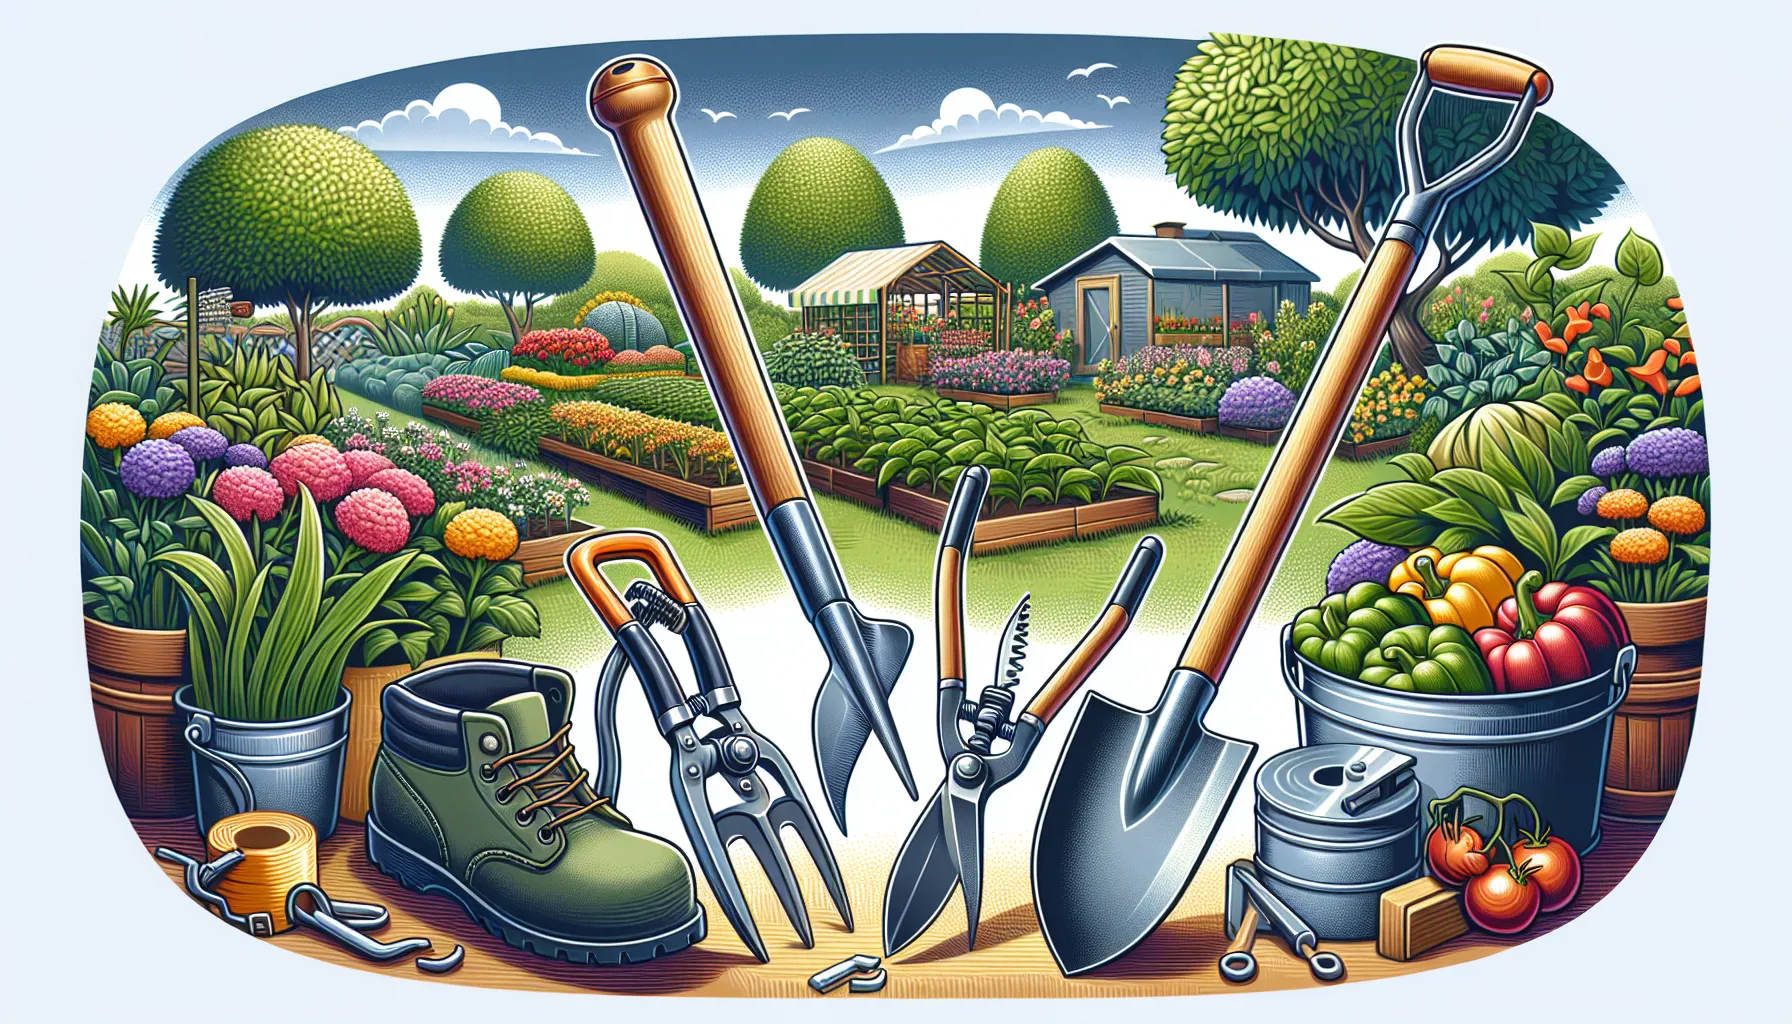 An illustration of a variety of well-maintained garden tools, including a garden tool sharpener, against a backdrop of a vibrant, organized garden.